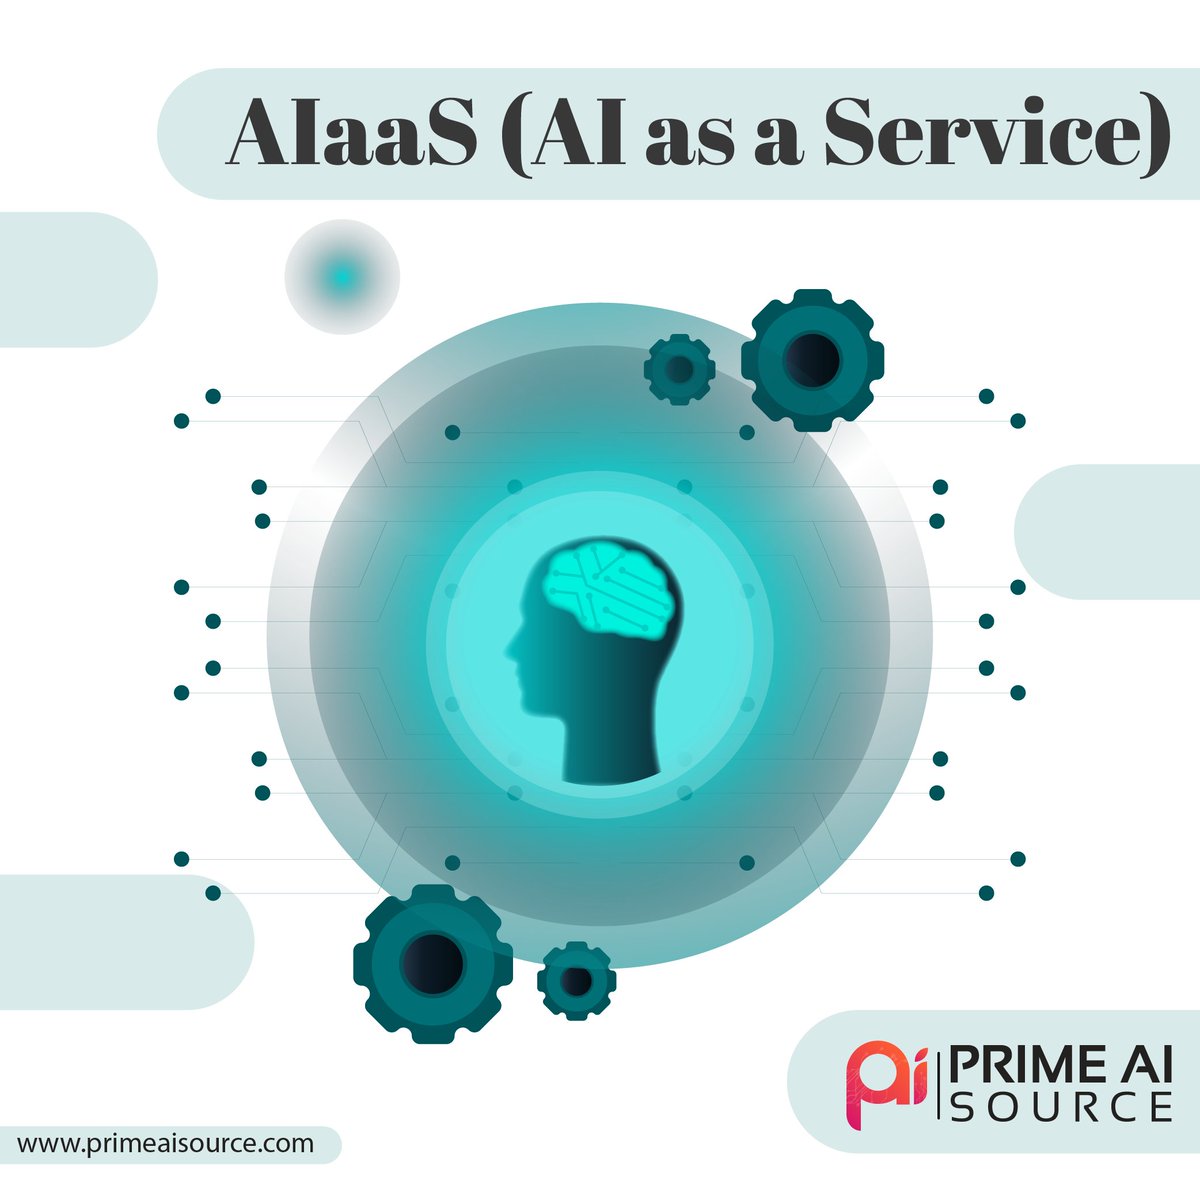 Revolutionize decision-making and streamline operations with our AI-powered solutions available through AI as a Service (AIaaS).
.
.
#primeaisource #AI #aiasaservice #AIaaS #SmartTechnology 🌐🔮